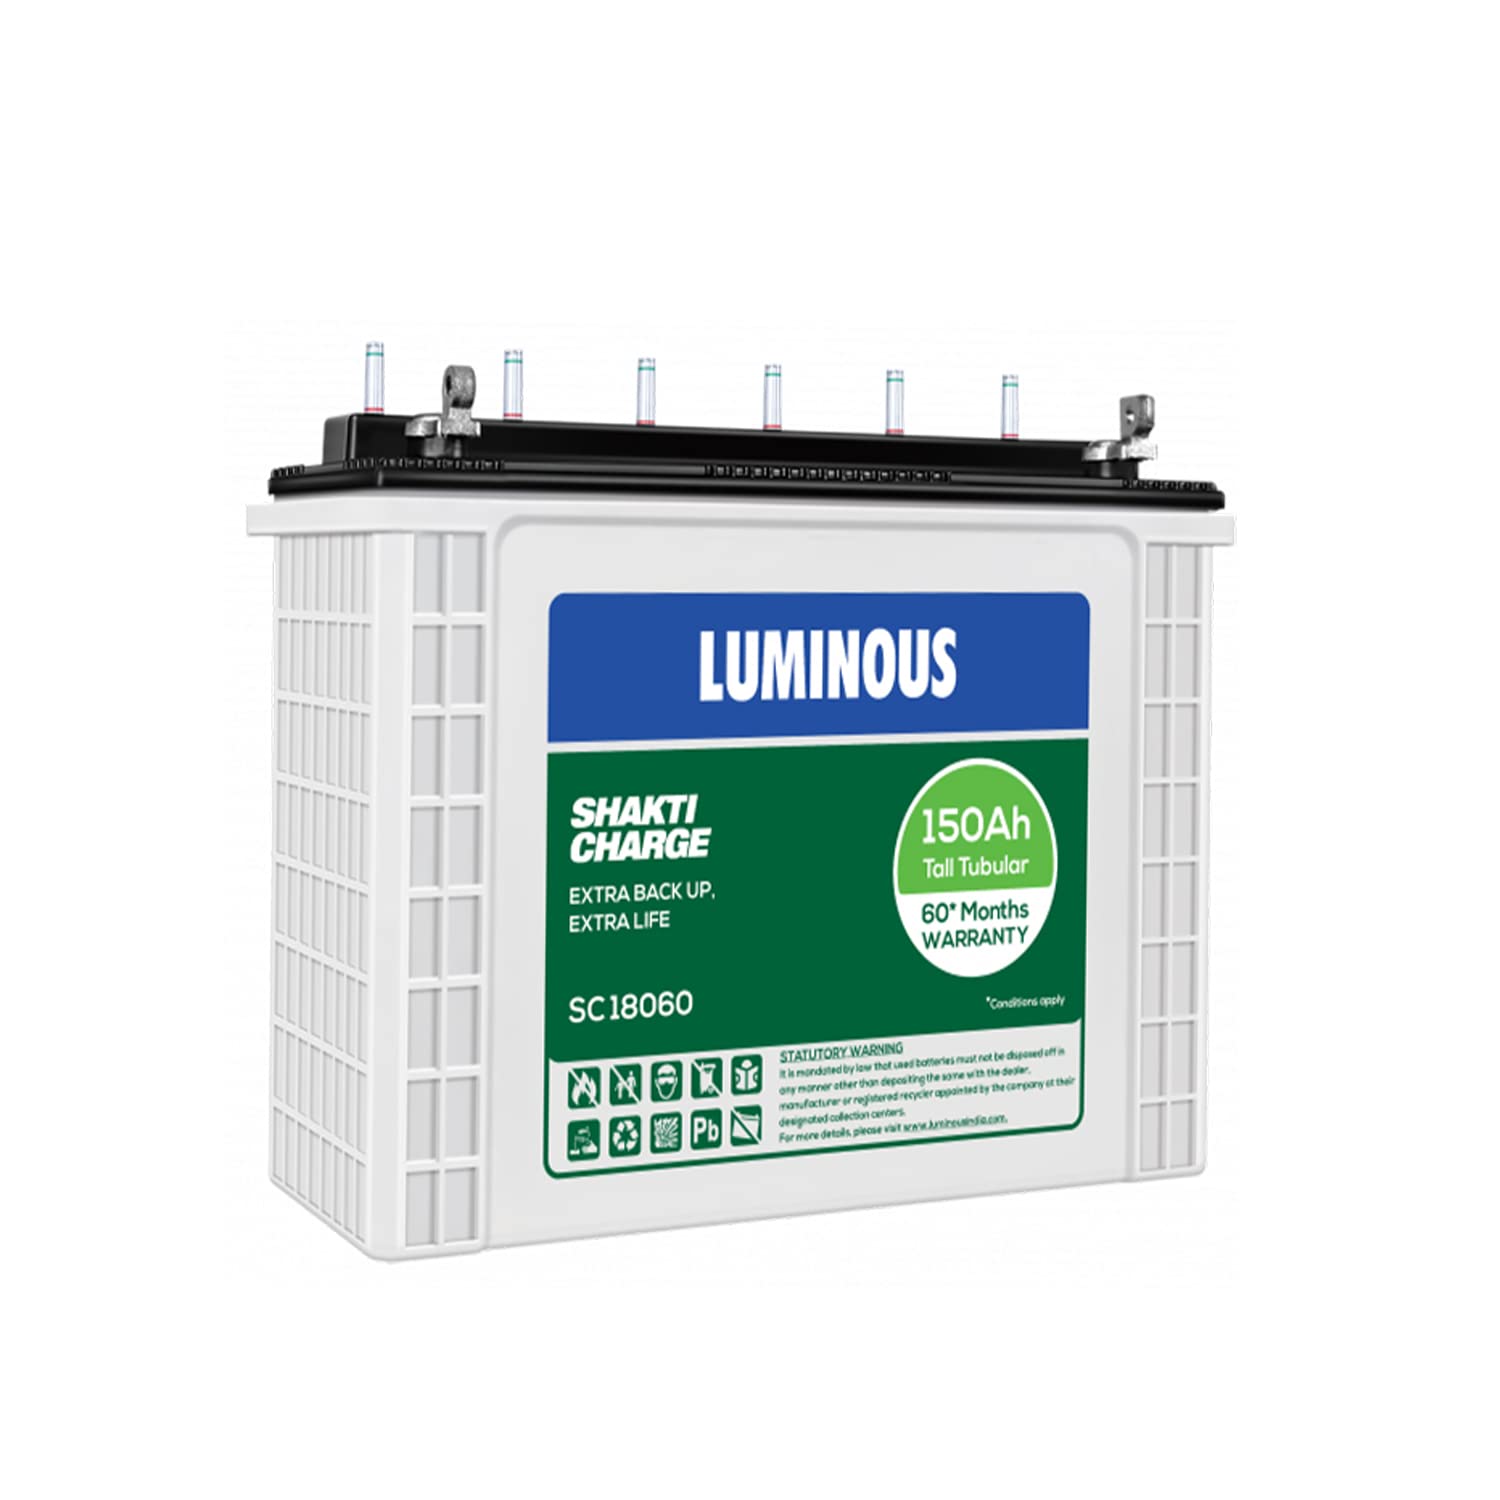 Luminous Shakti Charge SC18060 150Ah Tall Tubular Inverter Battery with 60 Months Warranty for Home, Office & Shops